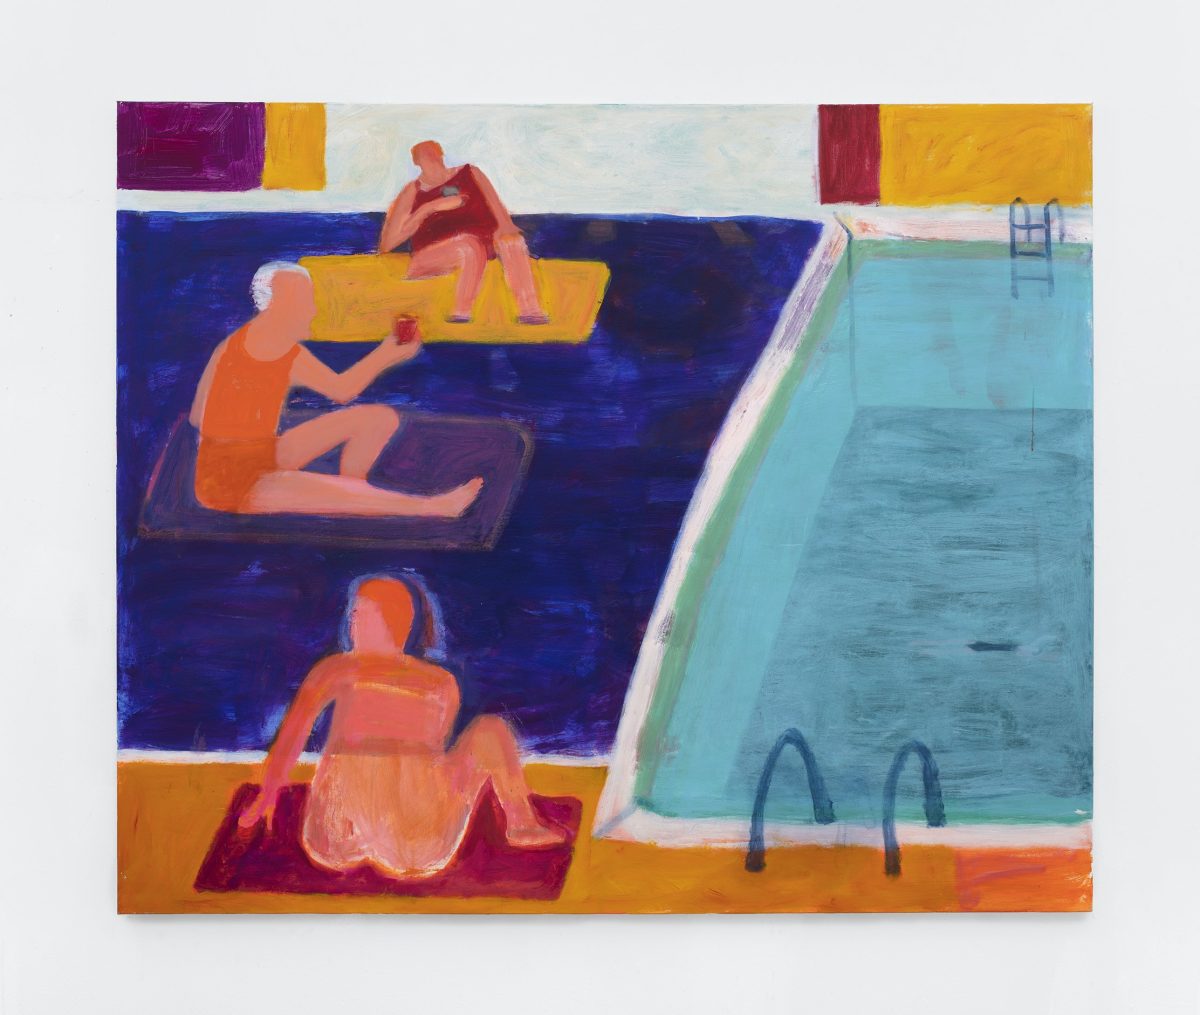 <I>Drinks by the Pool</I>, 2021
</br>
acrylic on canvas</br>
152.4 x 182.88 cm / 60 x 72 in>